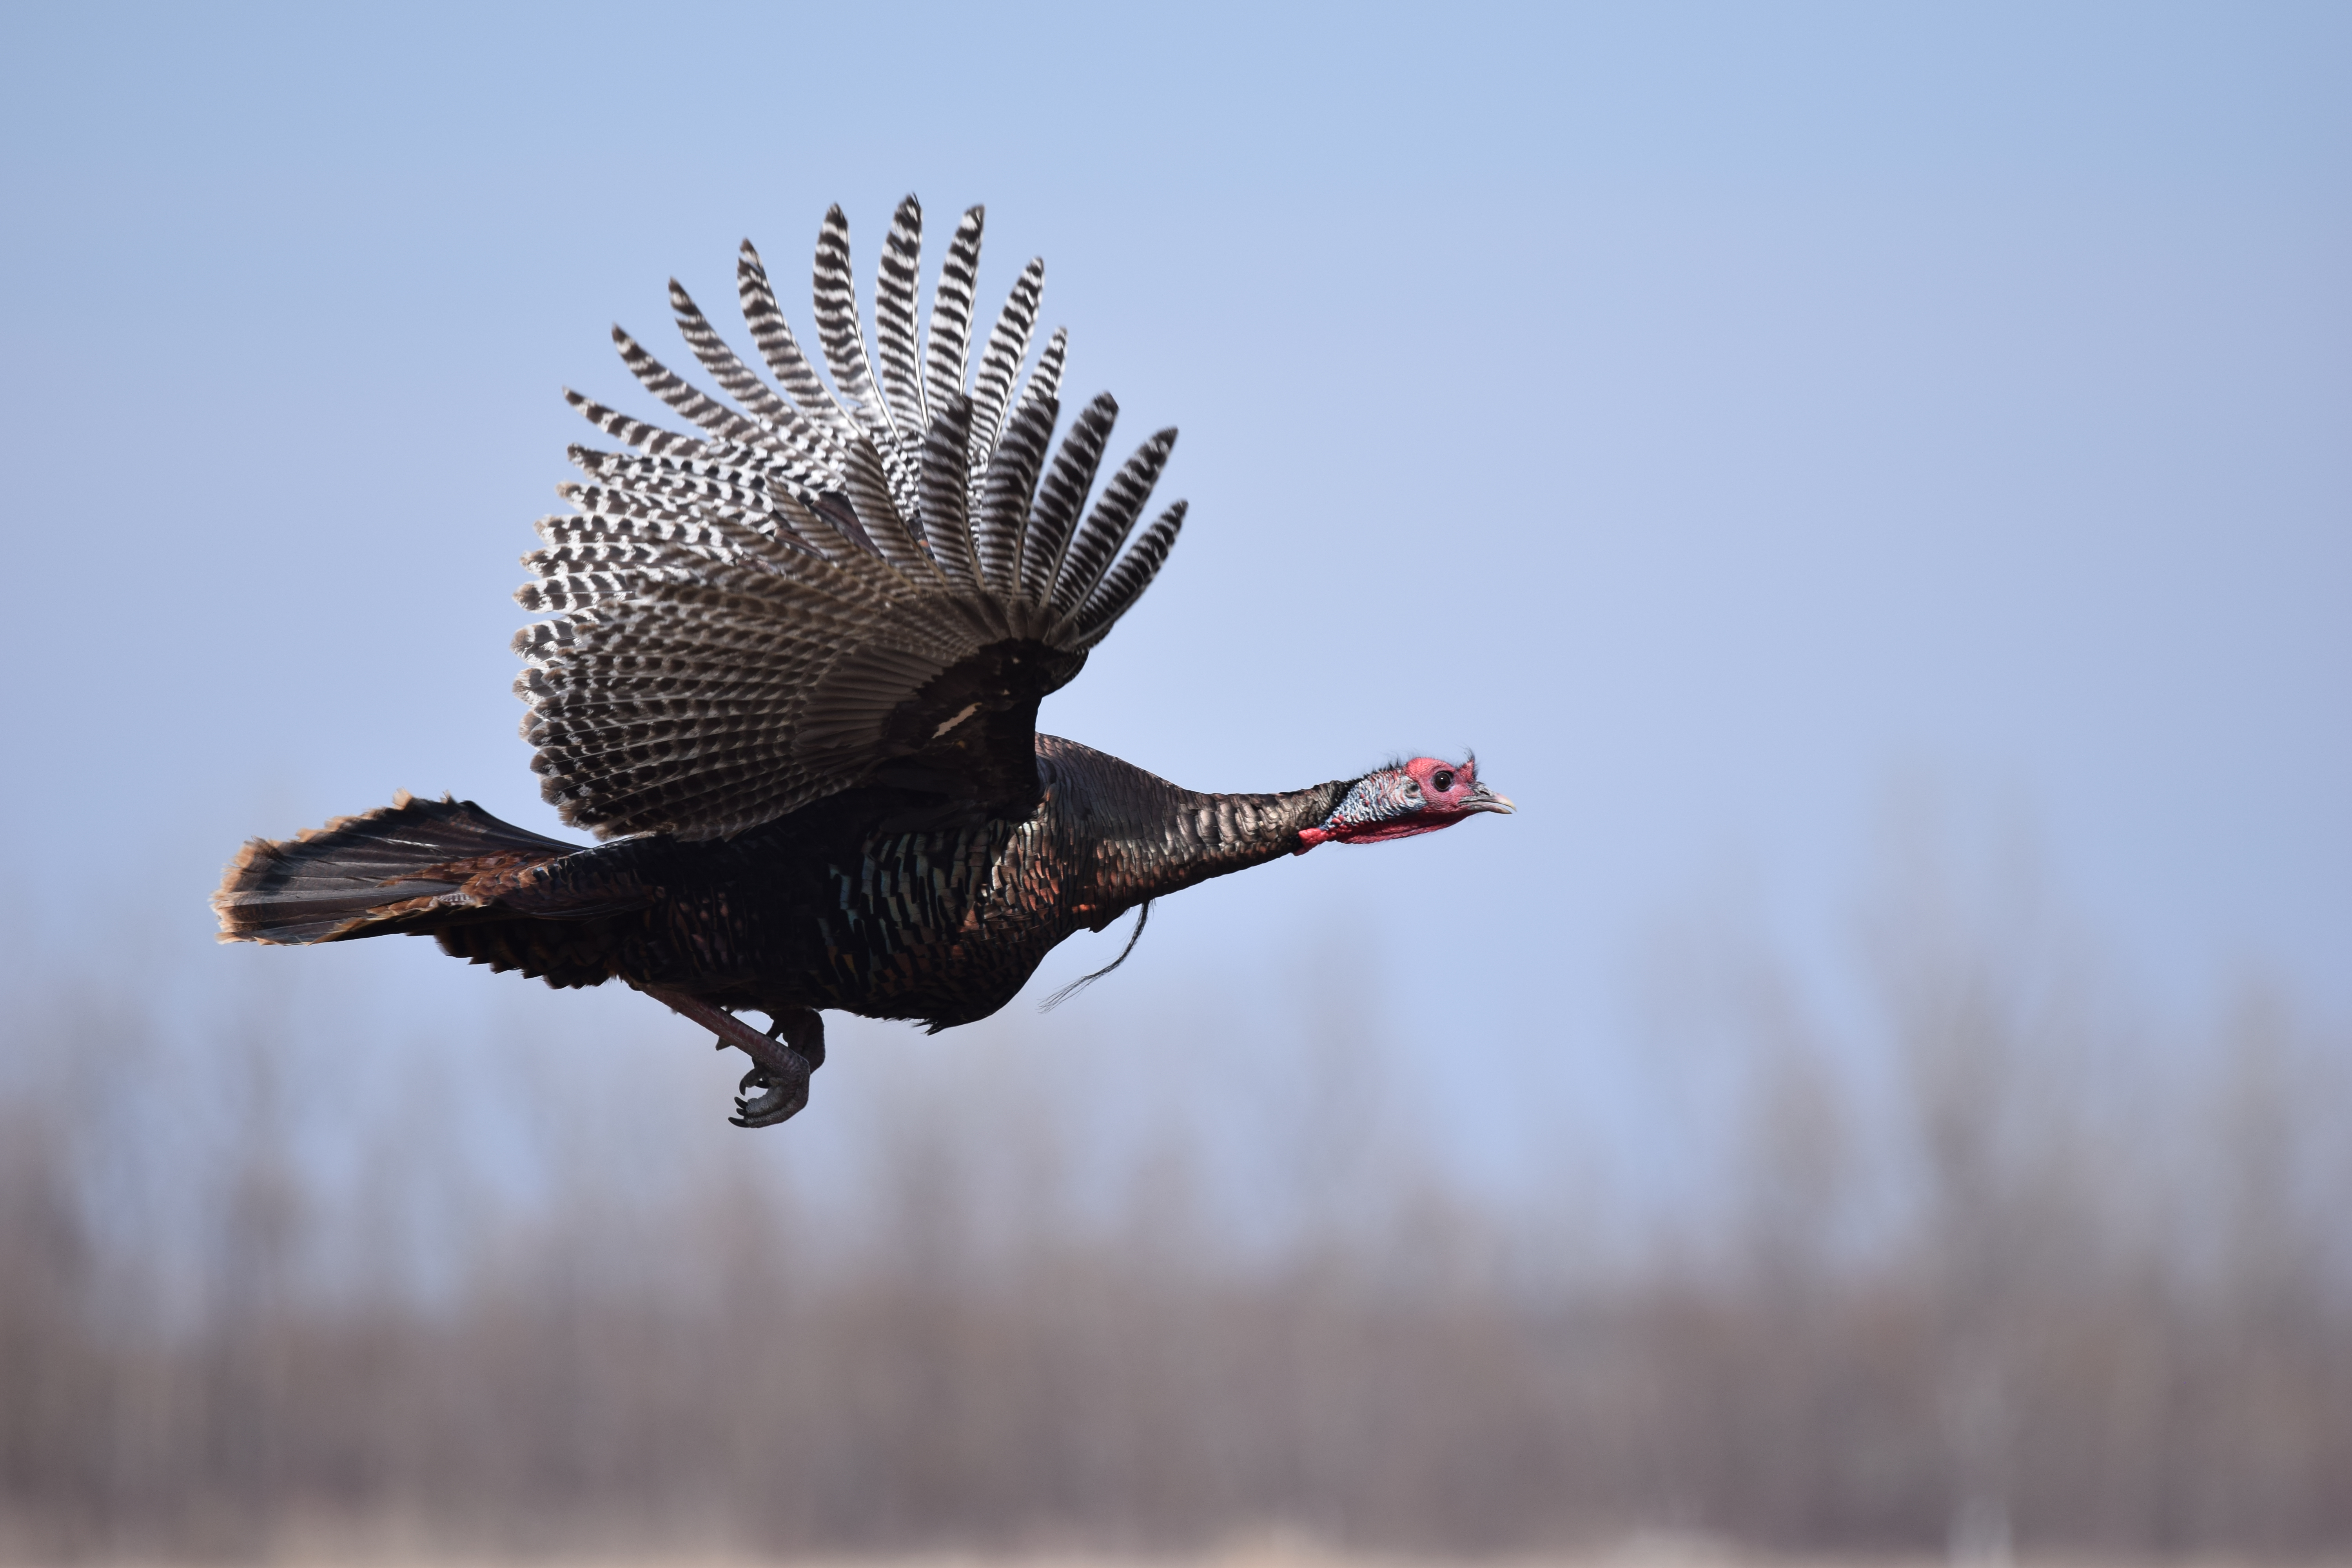 Profile view of a wild turkey in full flight. Pinion feathers, about 25 on each wing, are marked with alternating white and brown bands Neck and head are stretched straight ahead and tail is fanned flat behind.